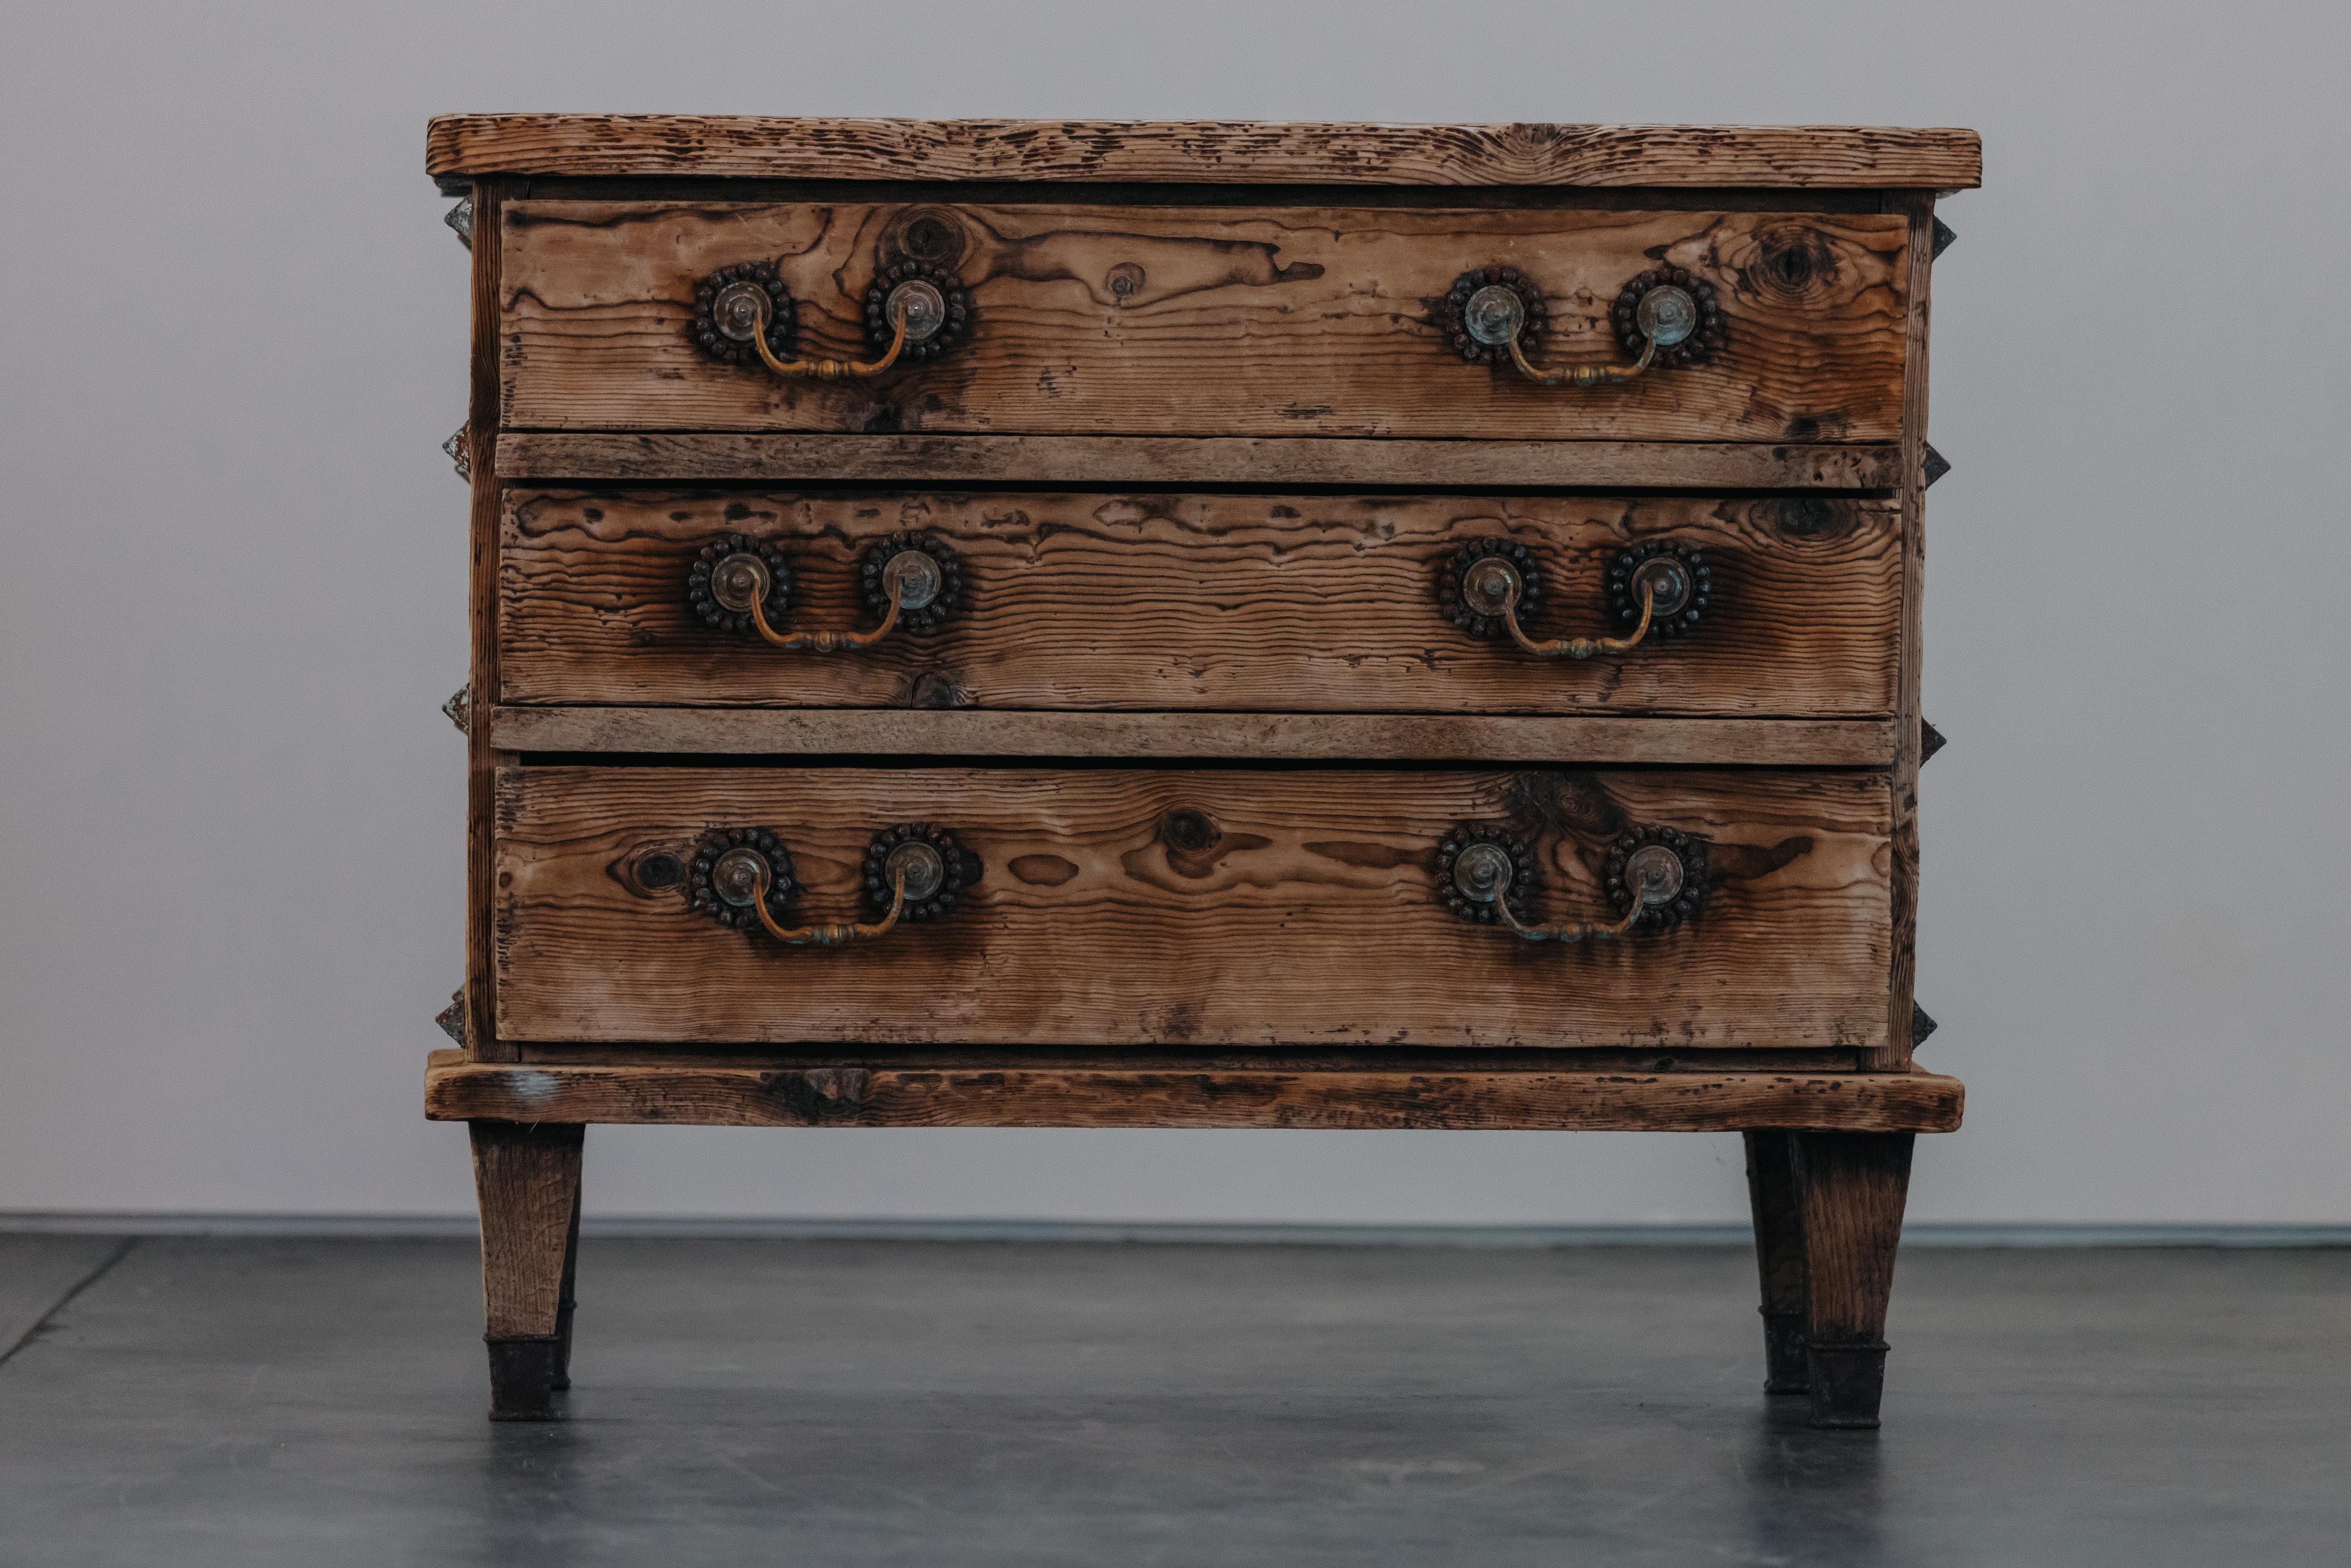 Early Pine Commode From France, Circa 1850.  Solid pine construction with great original iron detail and hardware.